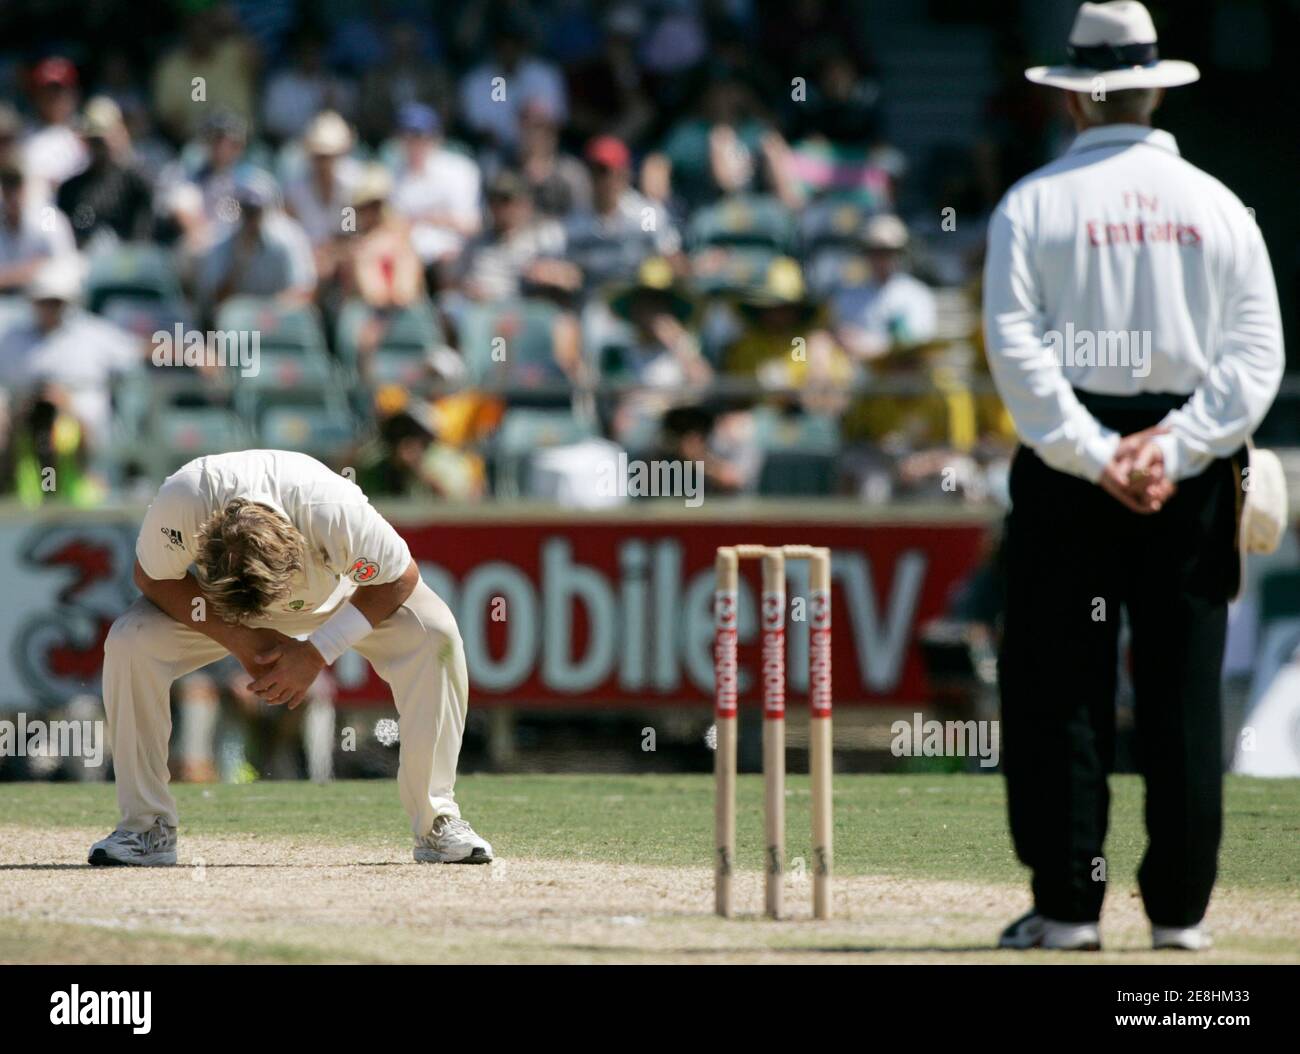 Australia's Shane Warne (L) reacts after having his appeal for England's Ian Bell's wicket turned down by umpire Rudi Koertzen during day four of the third Ashes cricket test in Perth December 17, 2006. MOBILES OUT EDITORIAL USE ONLY REUTERS/Will Burgess  (AUSTRALIA) Stock Photo